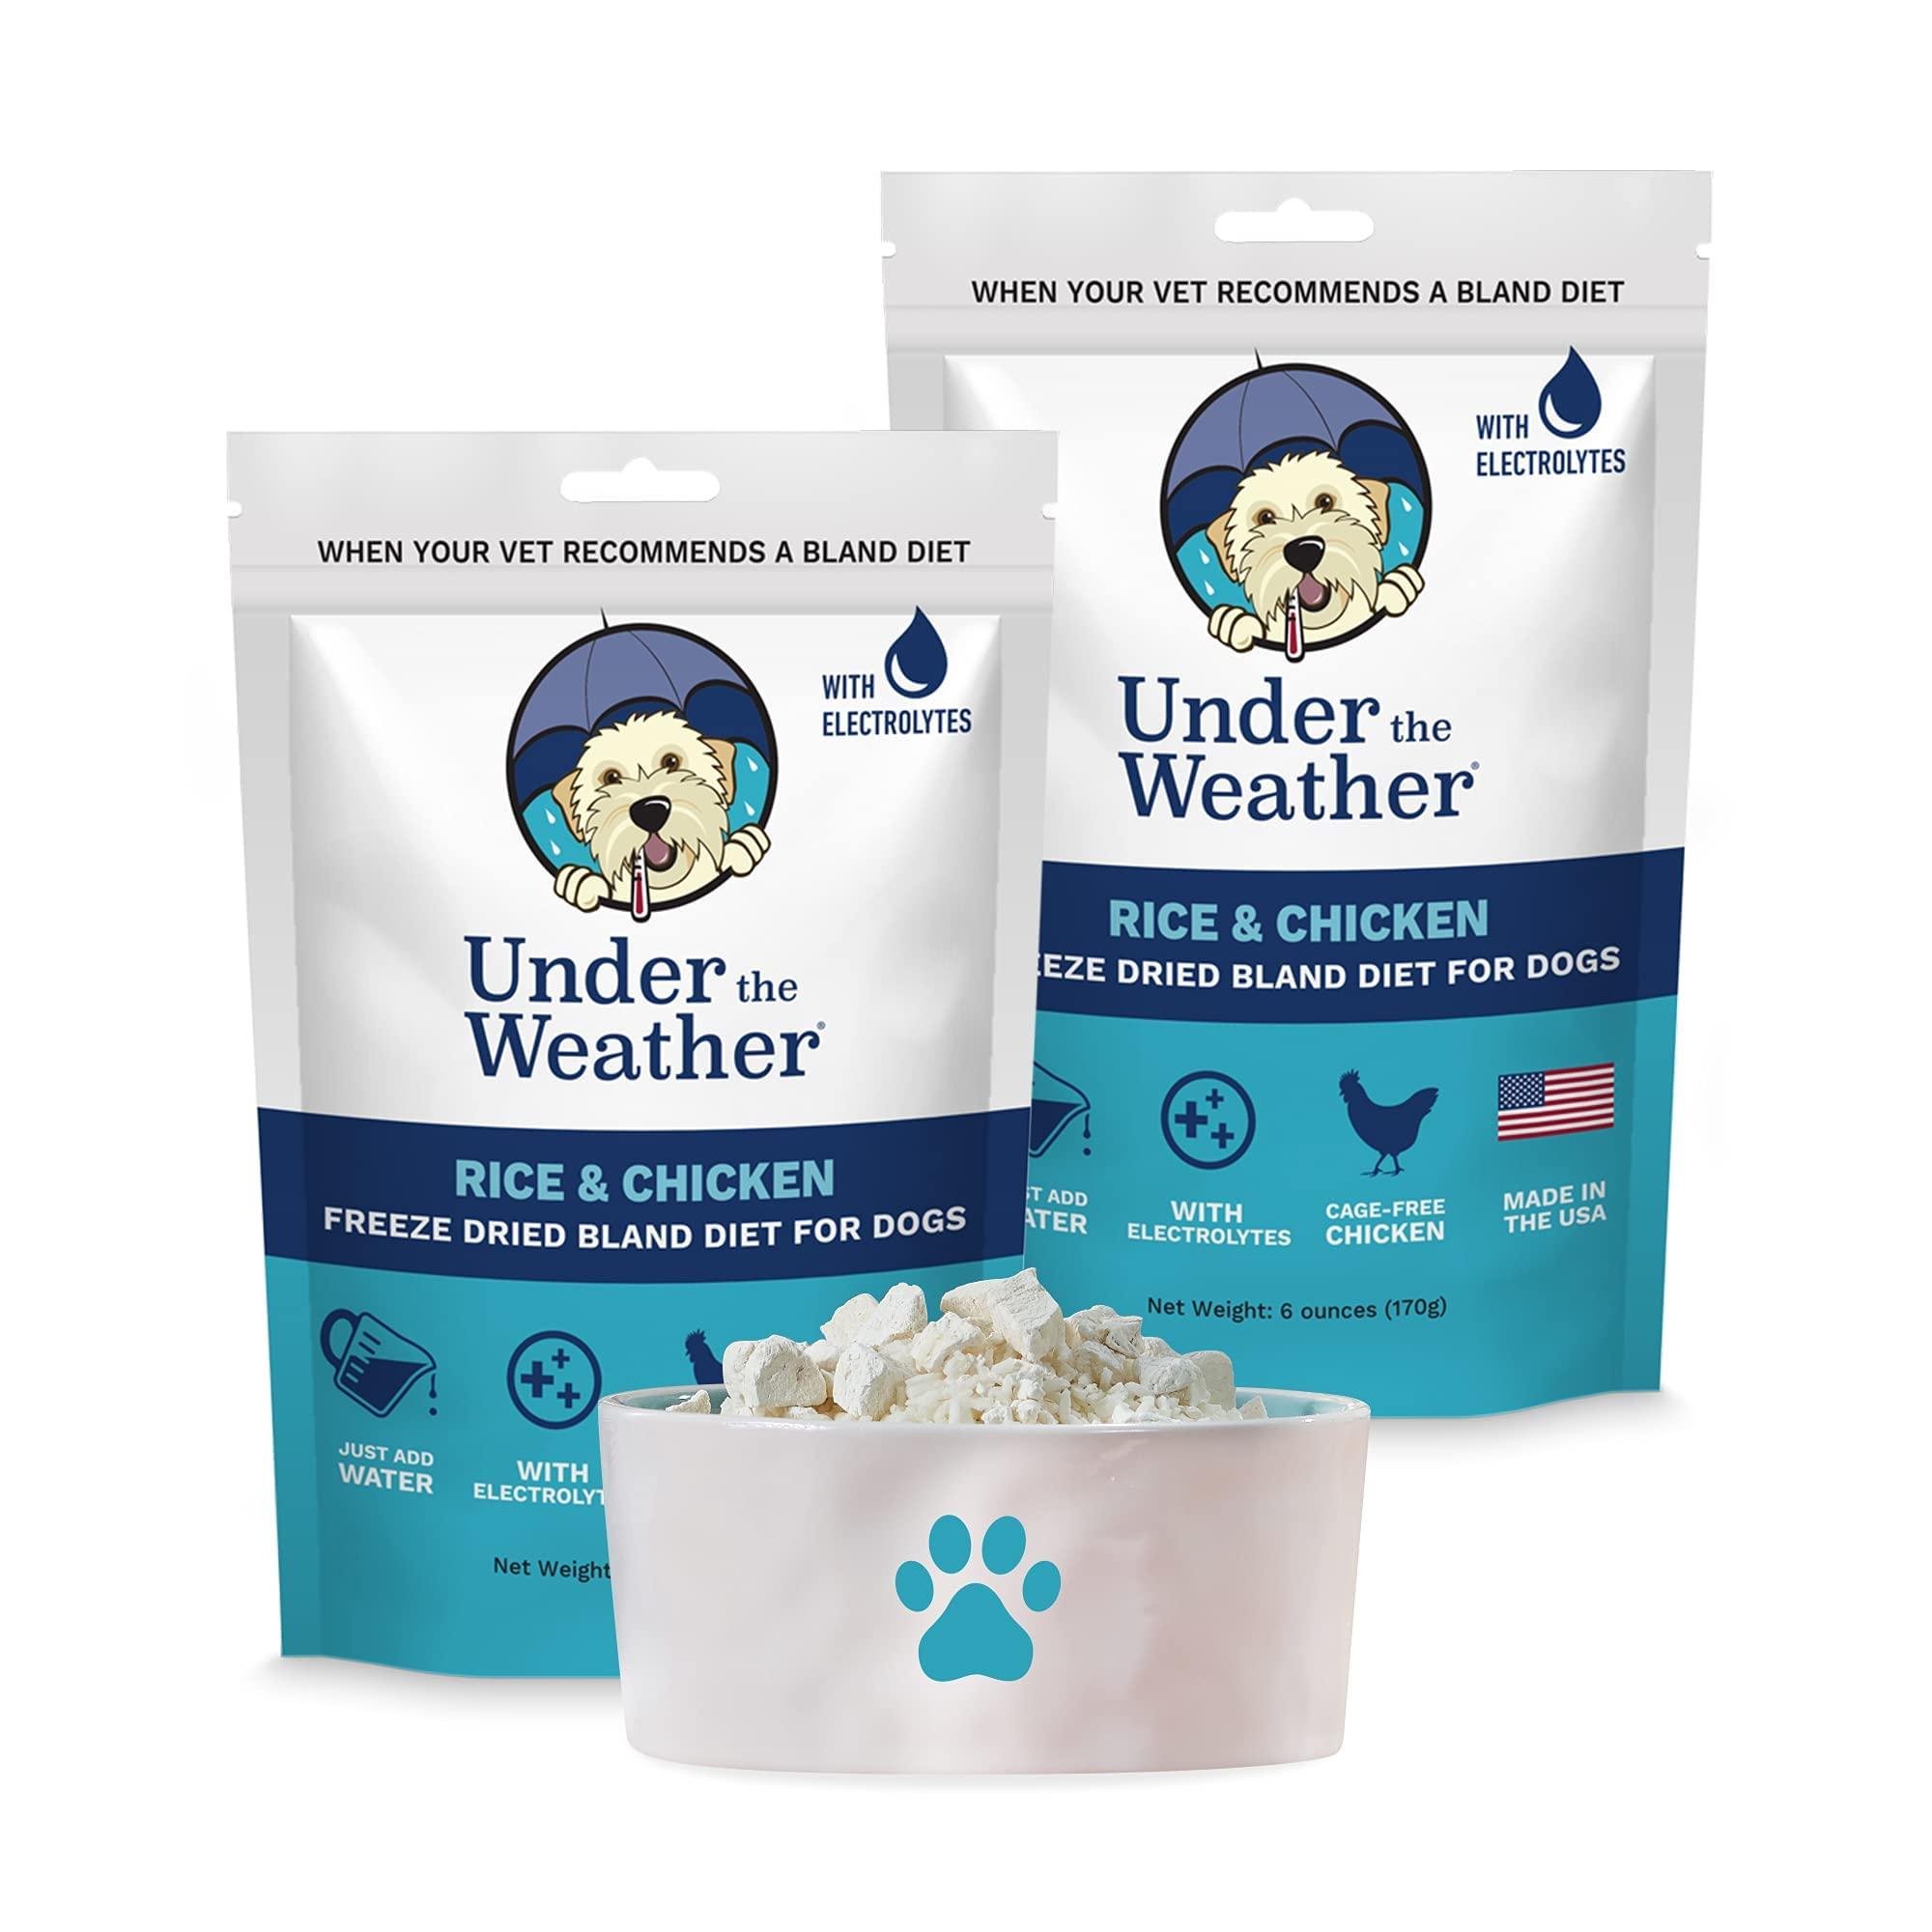 Under The Weather Easy to Digest Bland Diet for Sick Dogs - Contains Electrolytes - Gluten Free, All Natural, Freeze Dried 100% Human Grade Meats - Rice, Chicken & Pumpkin